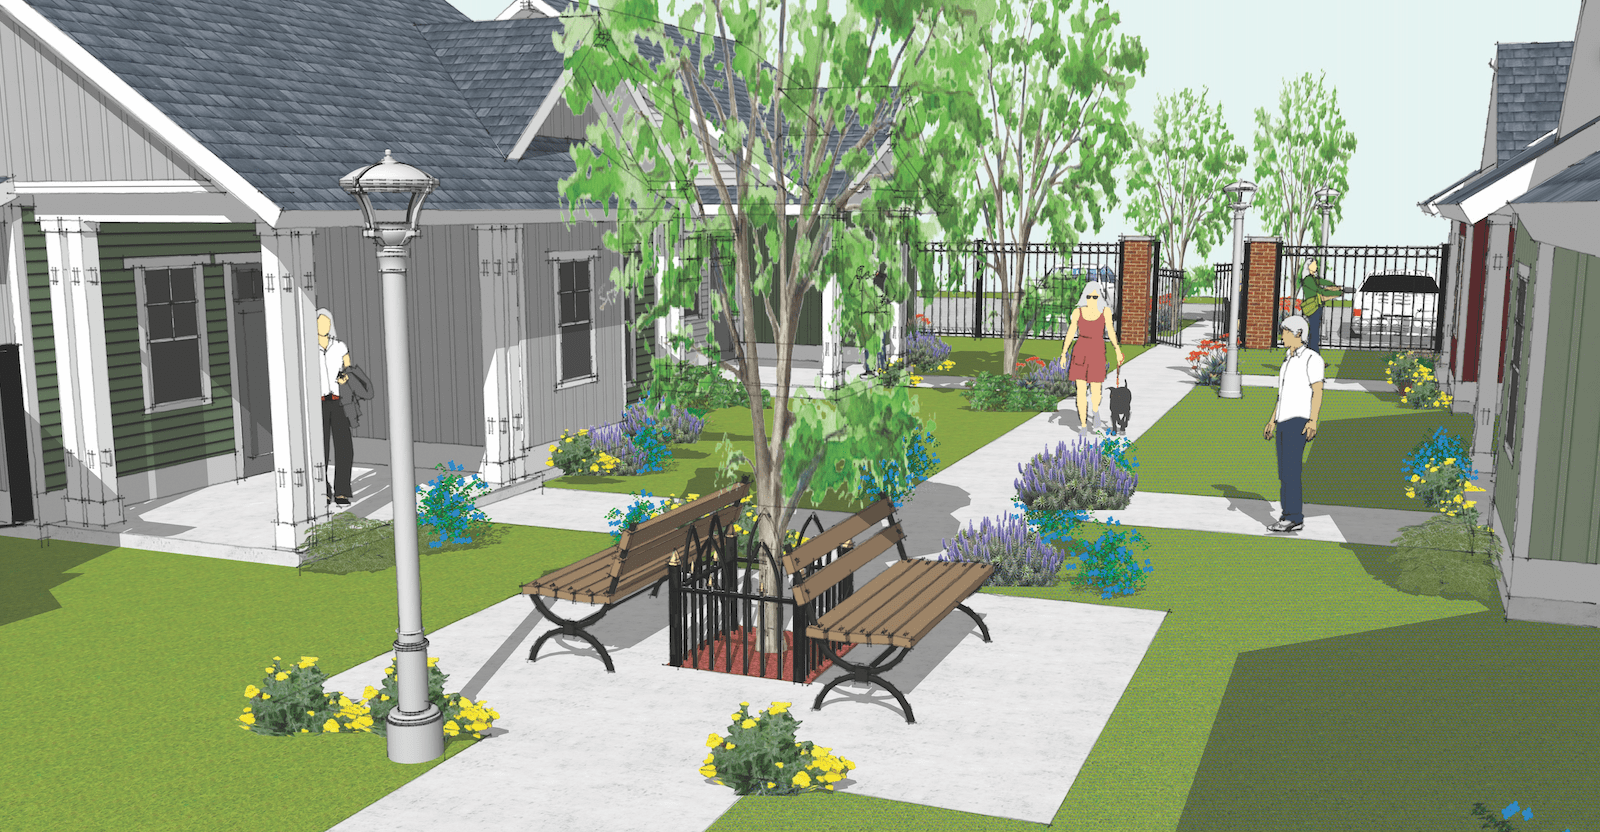 Rendering showing an exterior view of the 55+ Cottages design for single-family build-for-rent homes